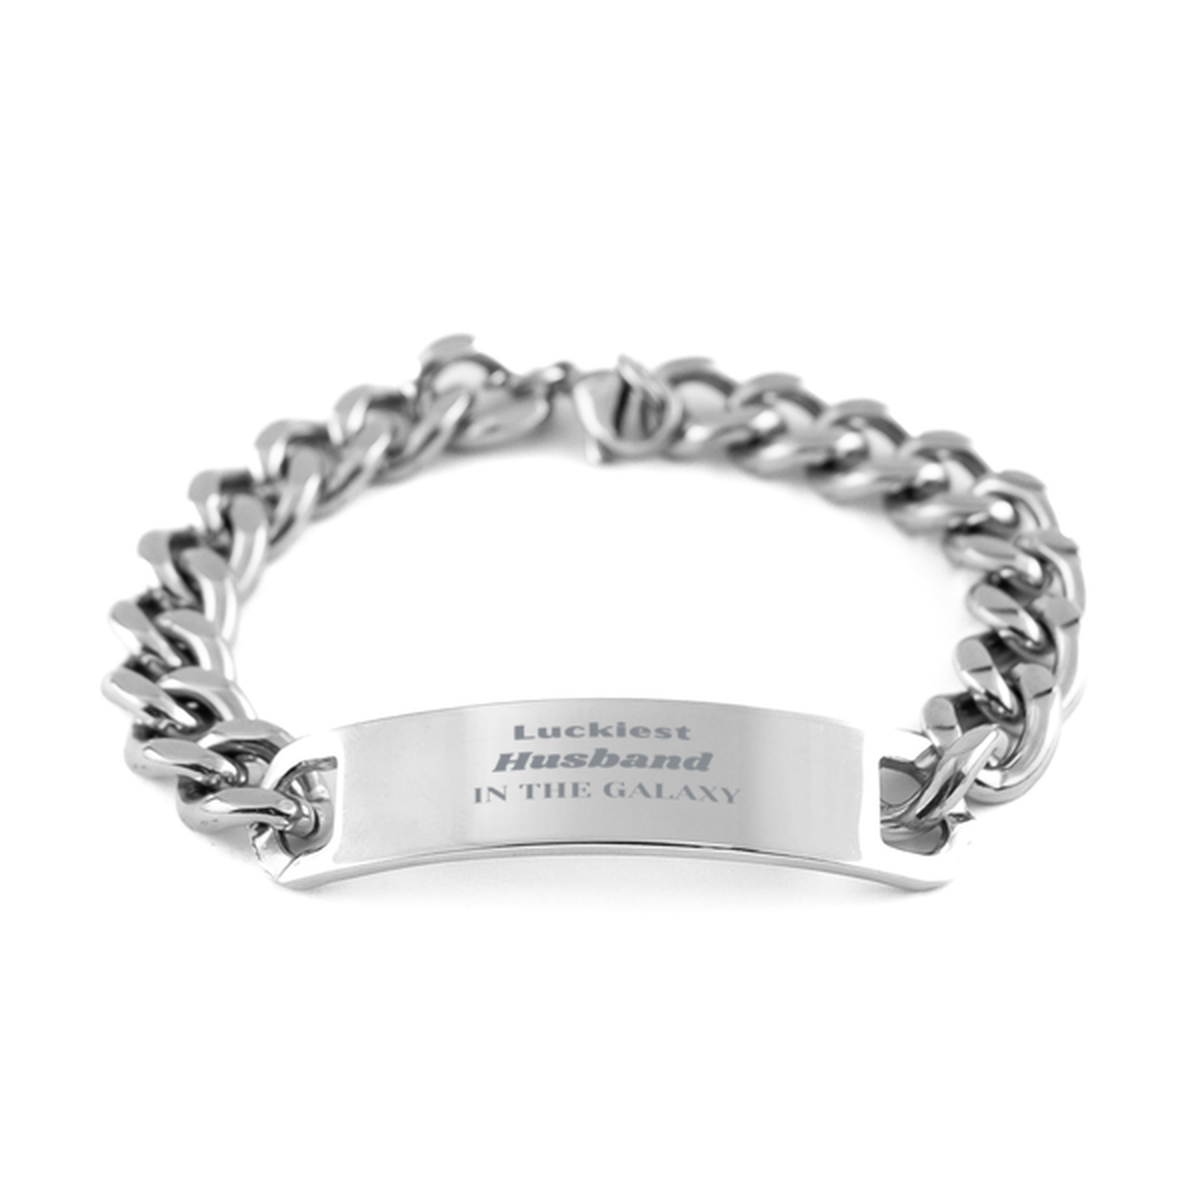 Luckiest Husband in the Galaxy, To My Husband Engraved Gifts, Christmas Husband Cuban Chain Stainless Steel Bracelet Gifts, X-mas Birthday Unique Gifts For Husband Men Women